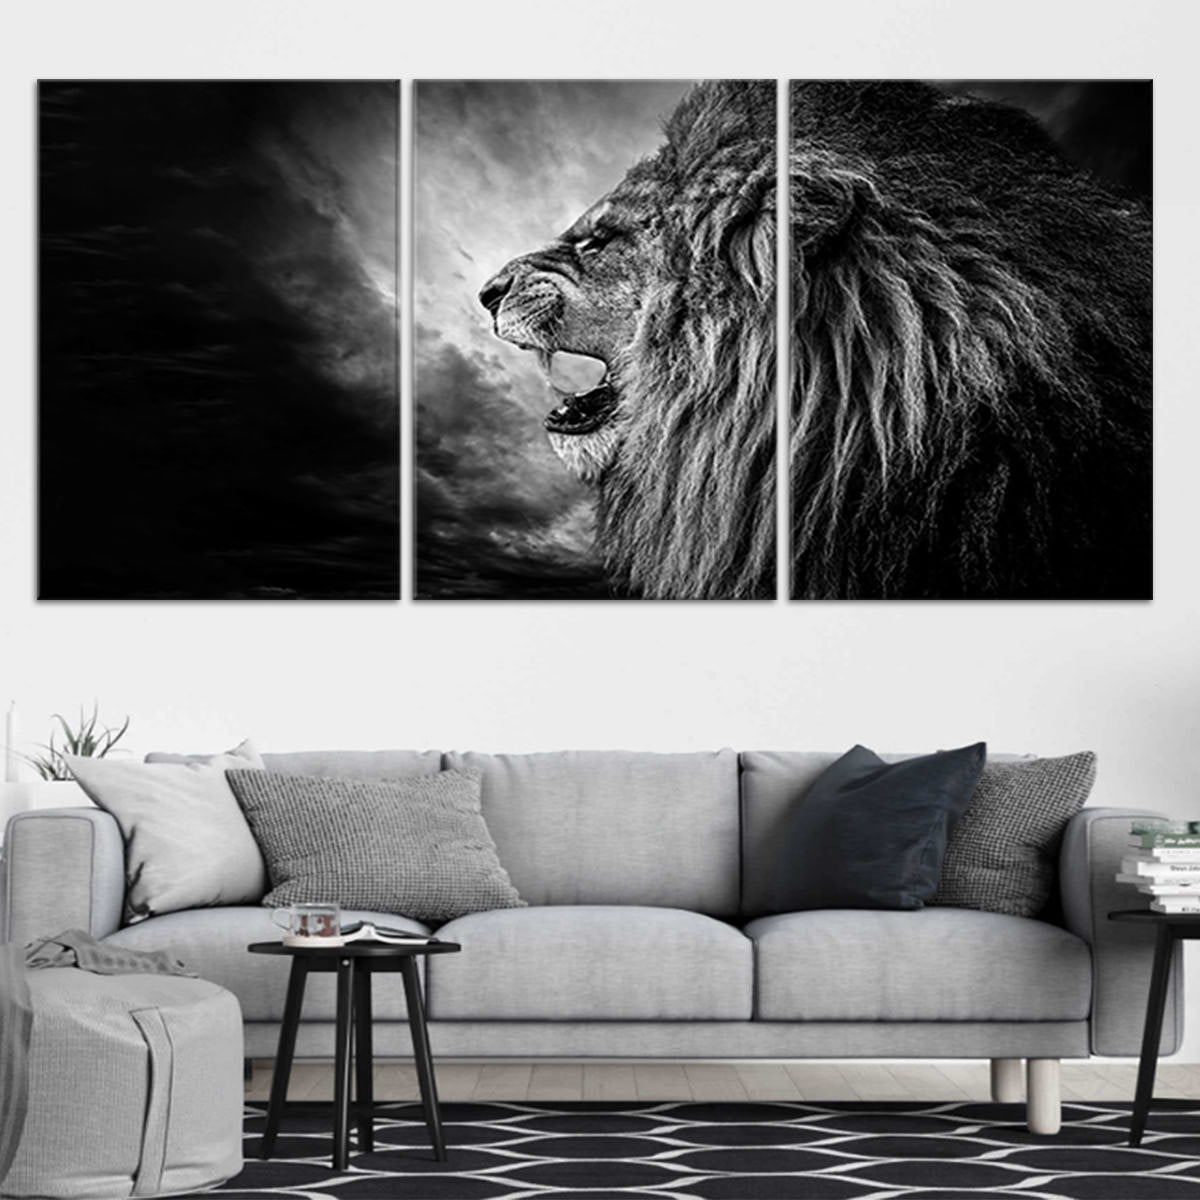 Black And White Roaring Lion Wall Art-Stunning Canvas Prints